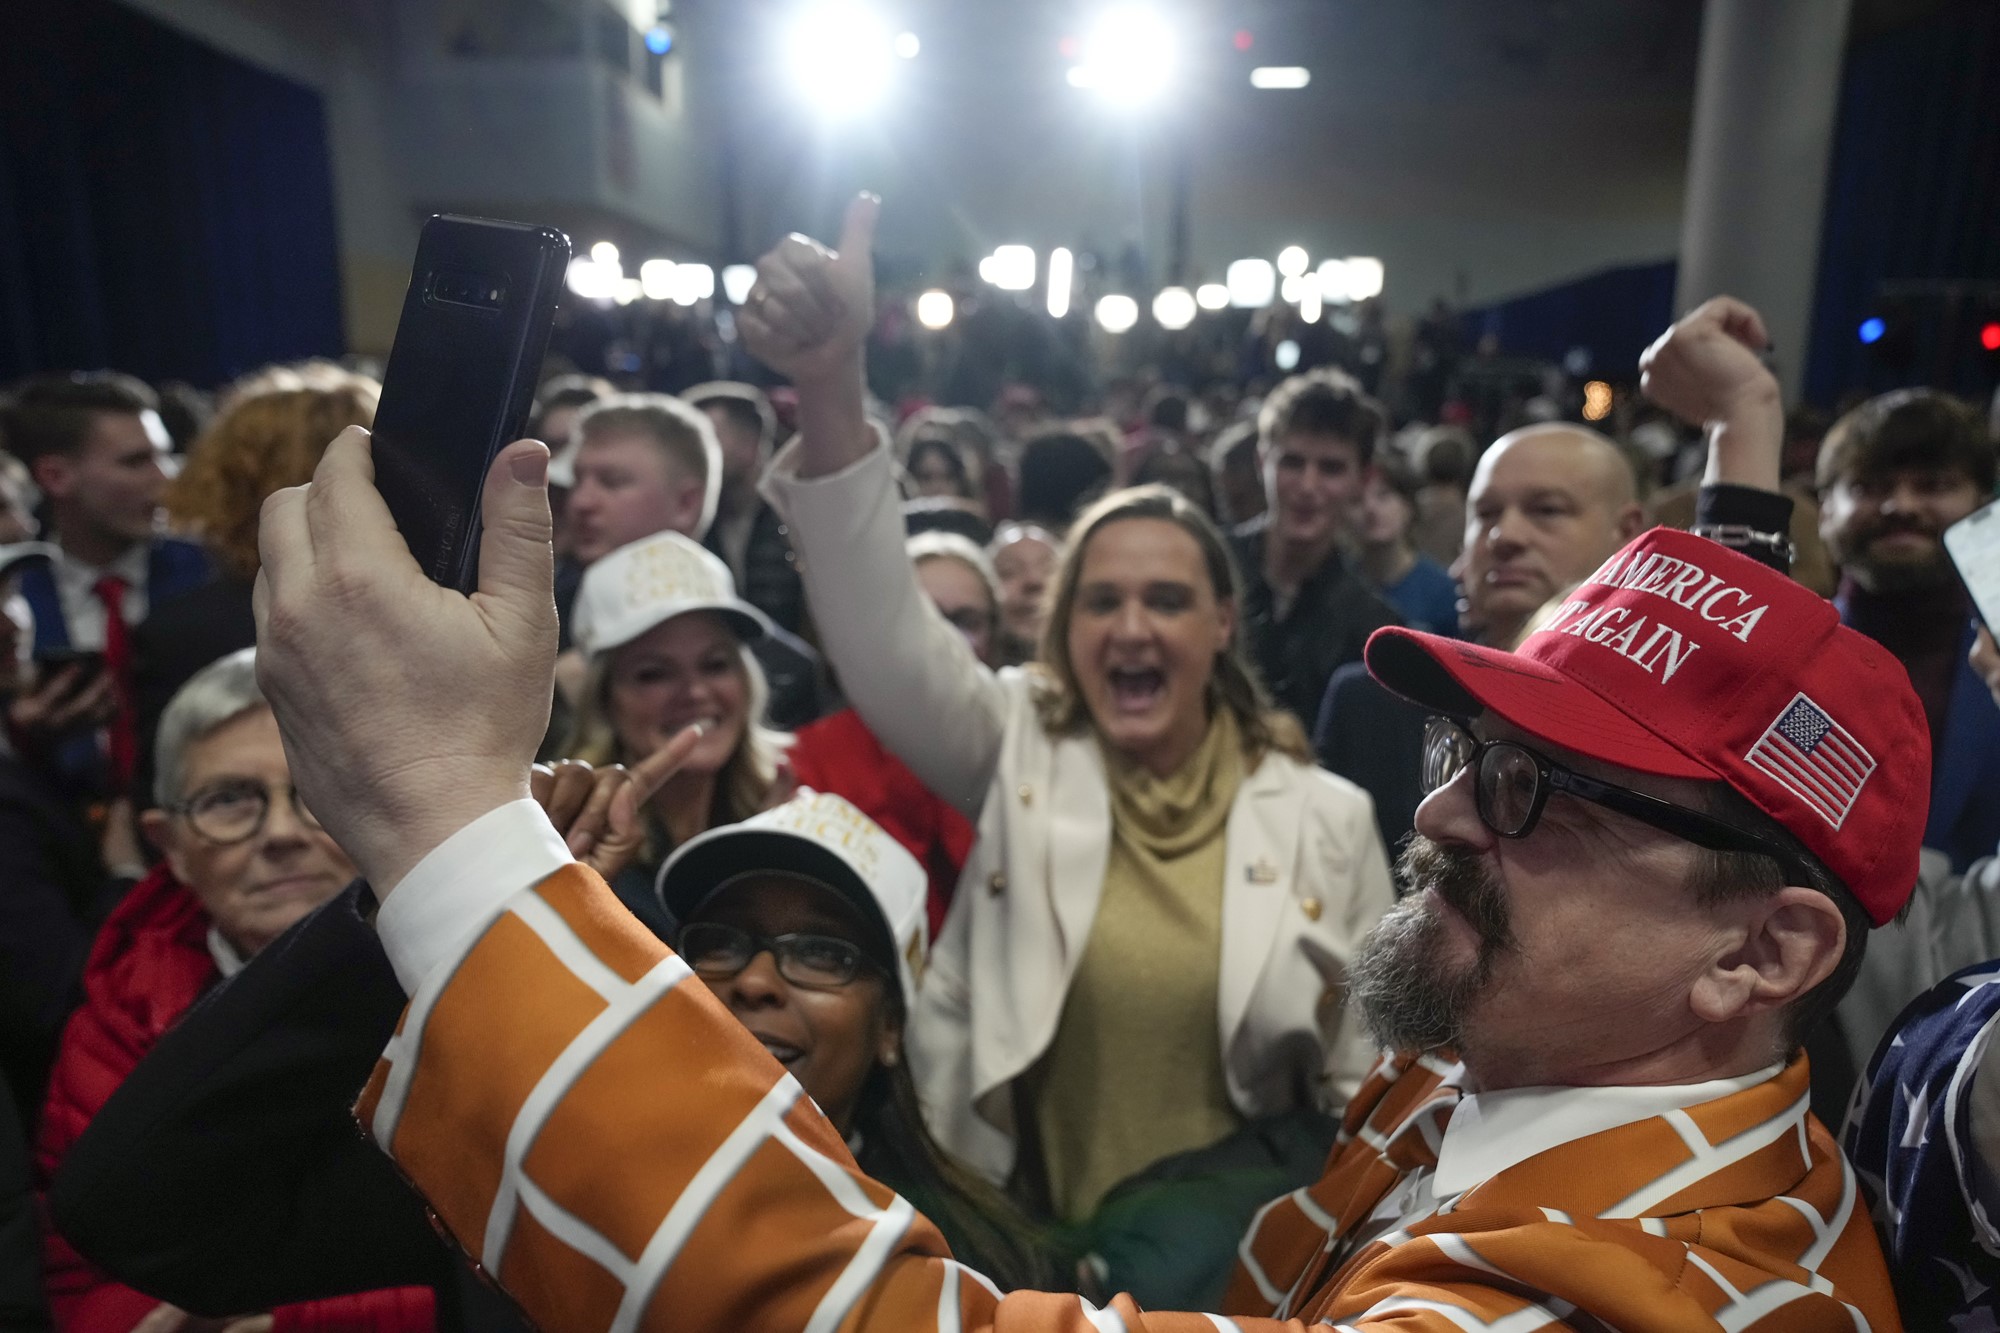 A man wearing a red Make America Great Again cap holds his phone up to take a selfie with the crowd